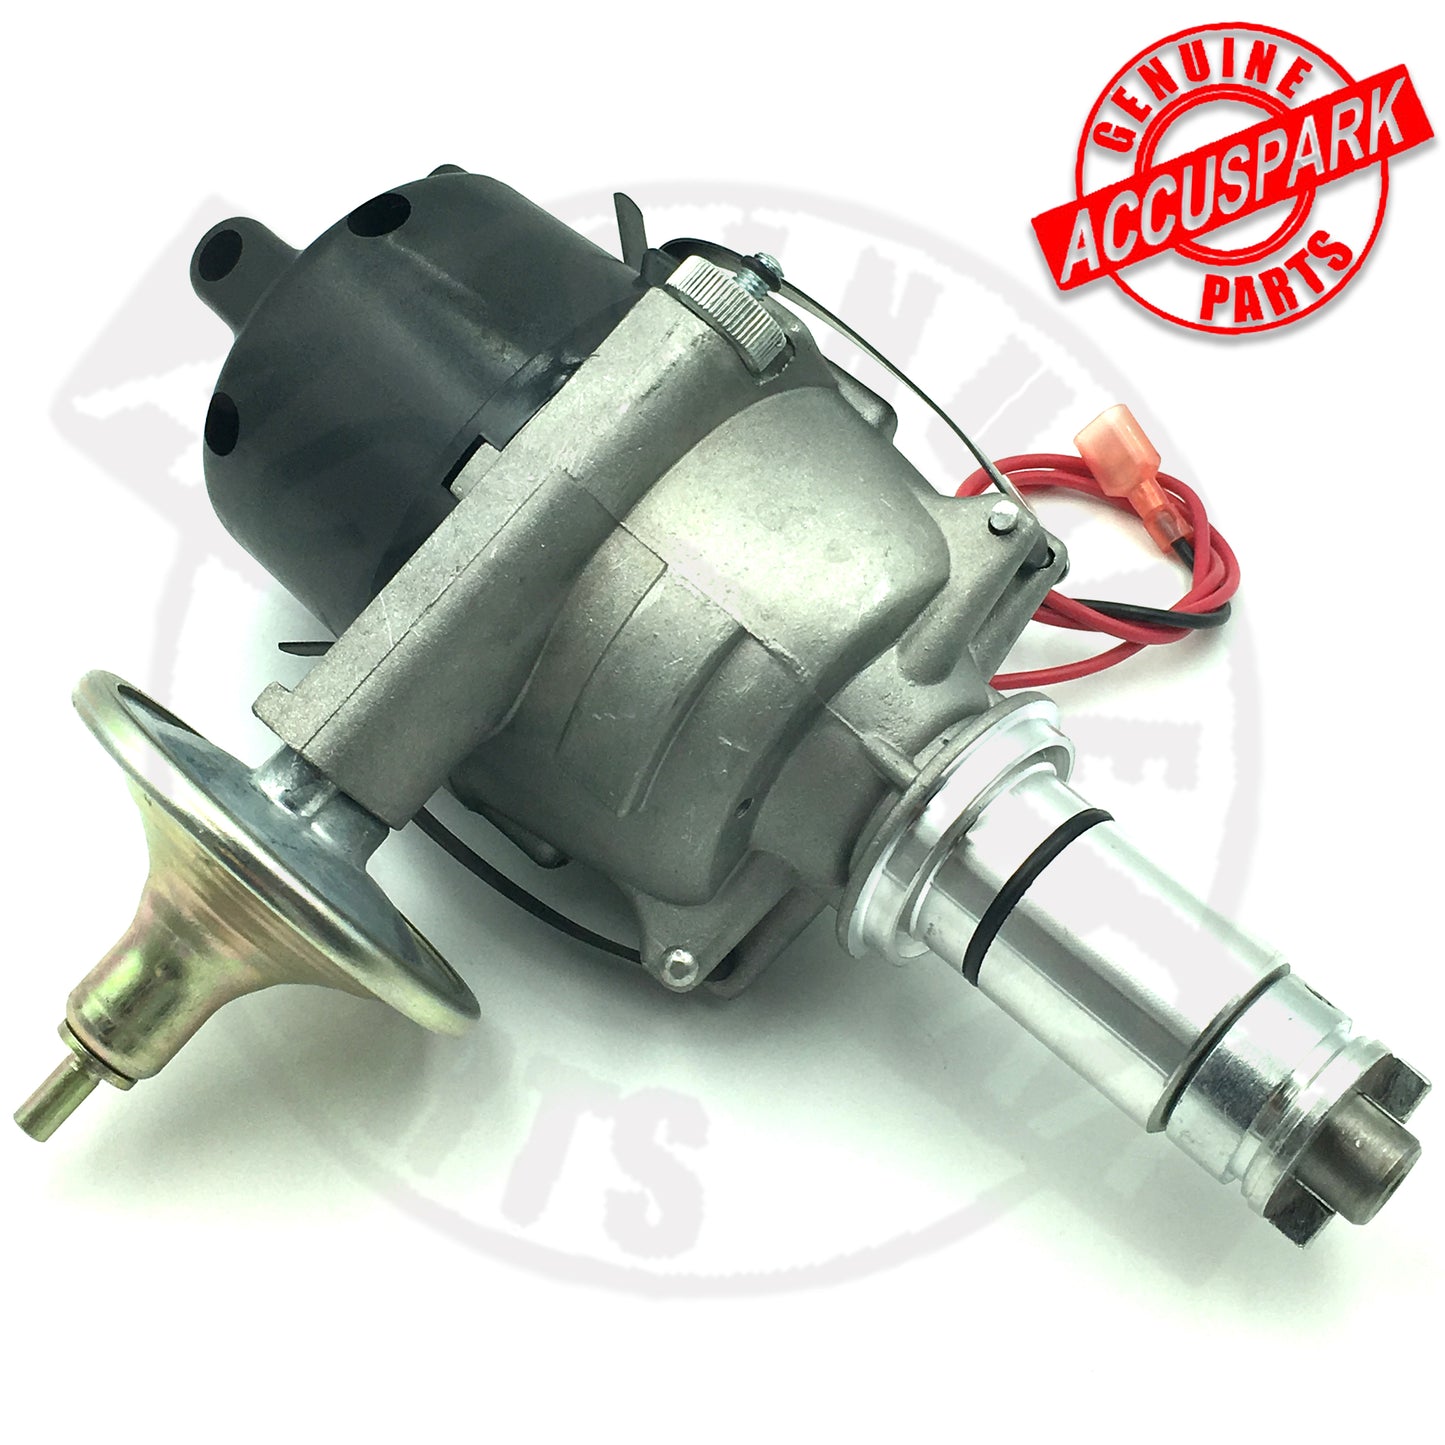 Distributor for MG Midget 1098/1275  AccuSpark Electronic ignition  negative Earth